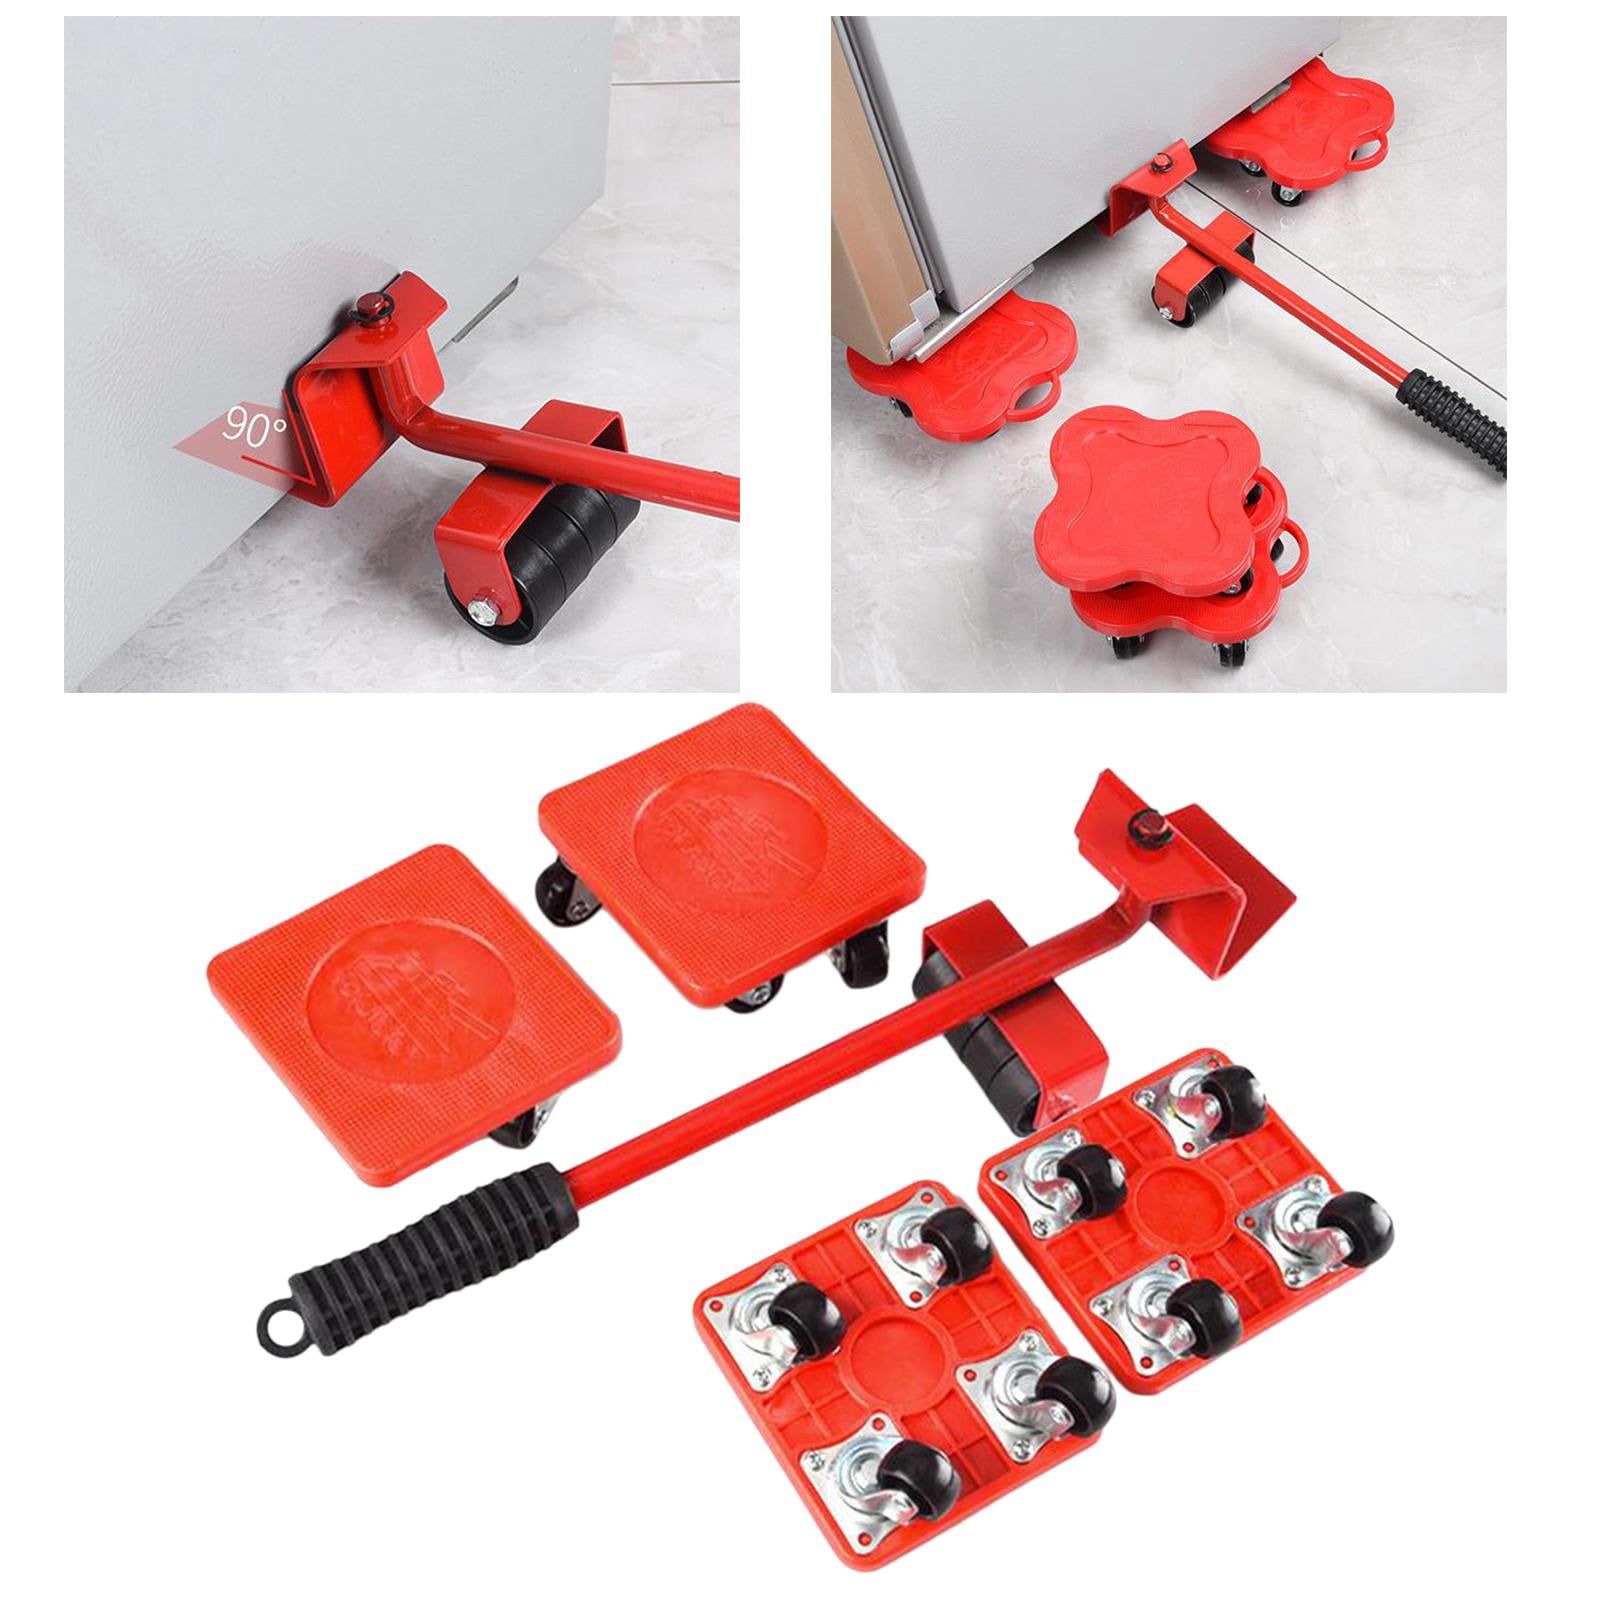 Onerbuy Furniture Lifter with 4 Pack Moving Sliders Heavy Furniture Roller Move Tools Max Up for 150kg/330 lb, 360 Degree Rotatable Pads (Red)